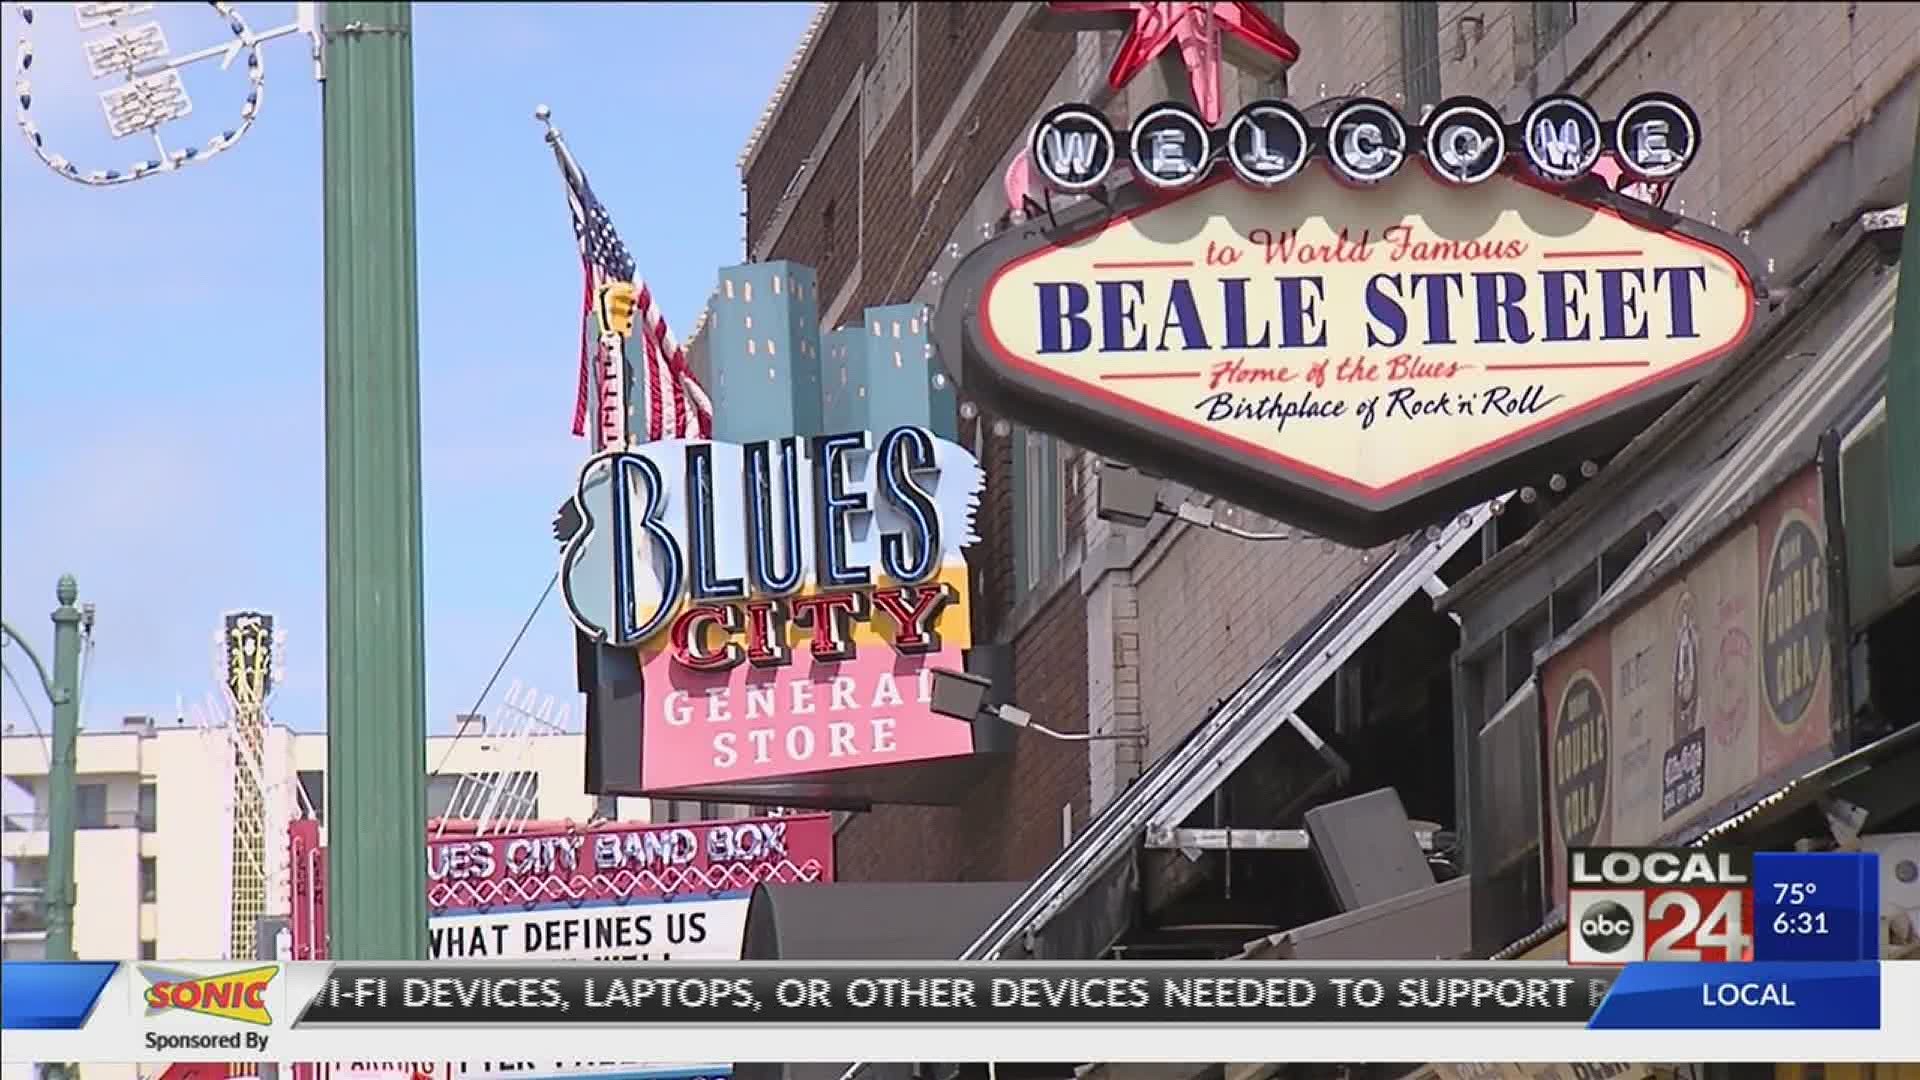 Shelby Co. bars have been ordered to close due to rising COVID-19 cases but Beale Street is exempted. Atomic Rose says it will close Fridays and Saturdays.